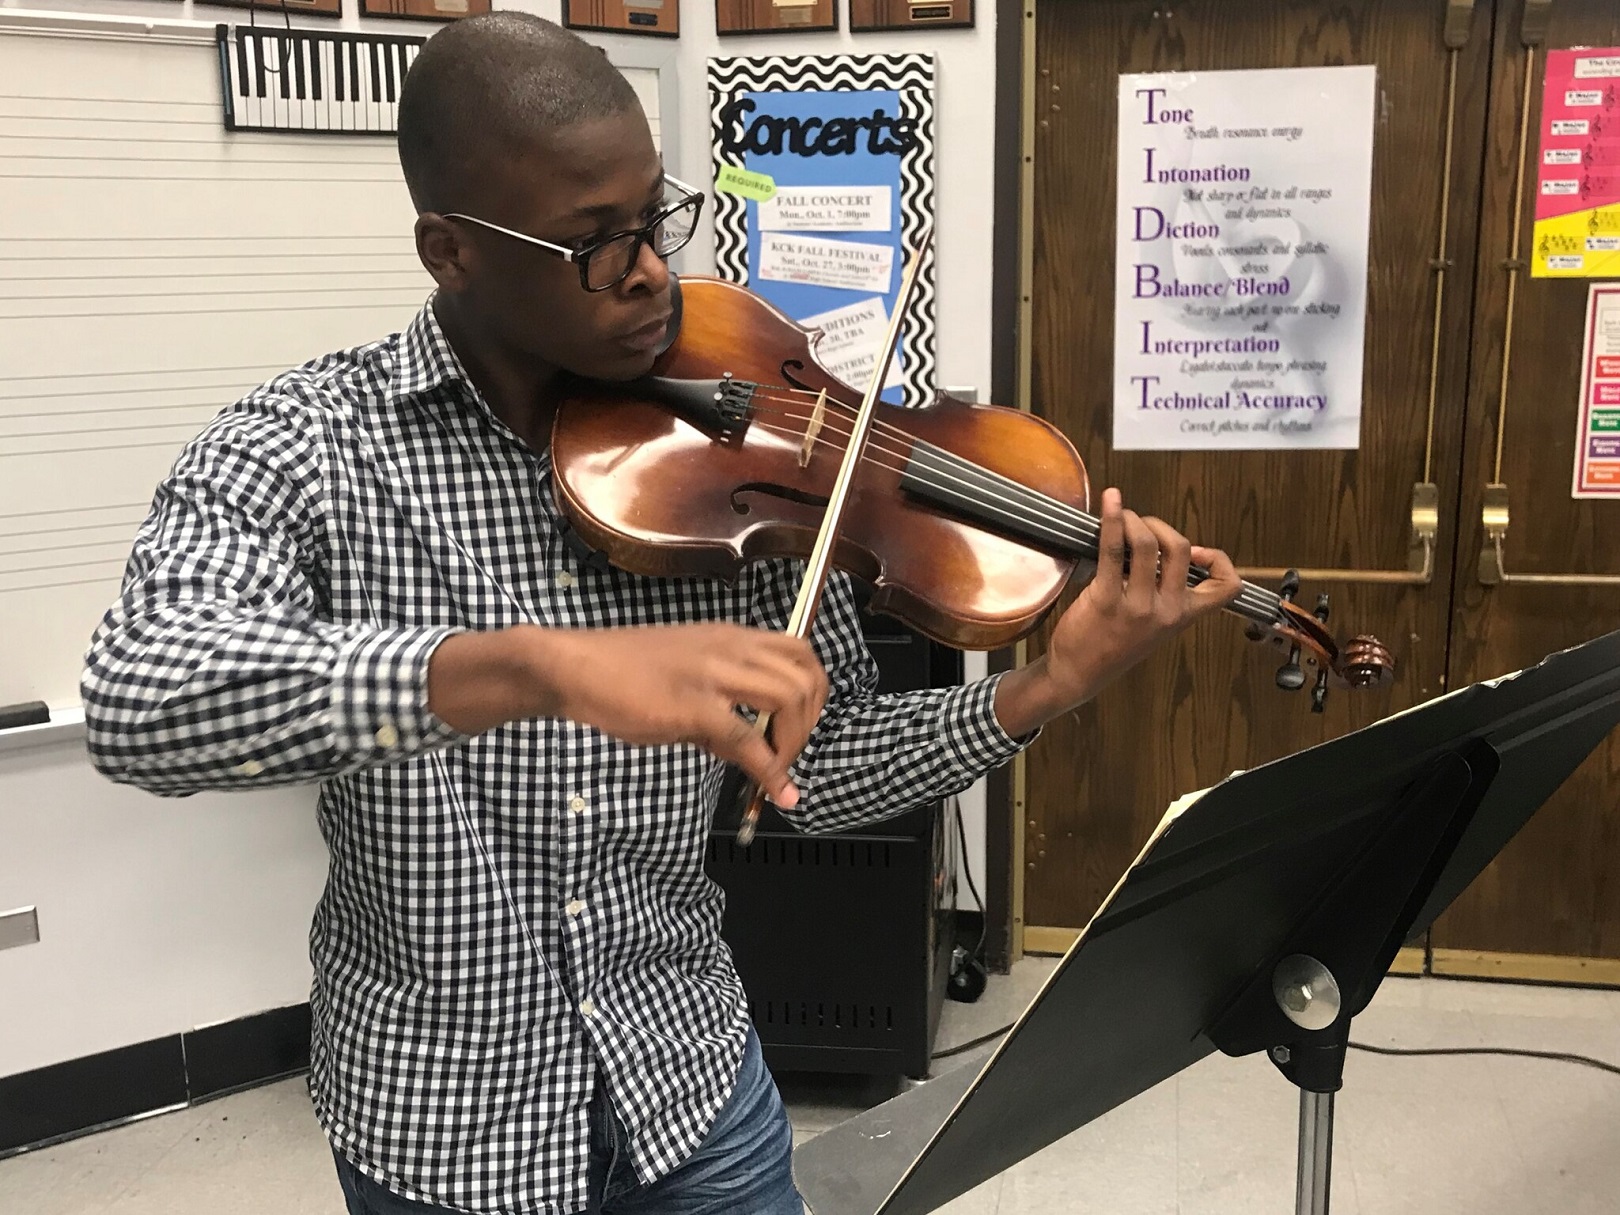 student-plays-violin-at-music-stand-while-crafting-technique-during-academy-lesson.jpg